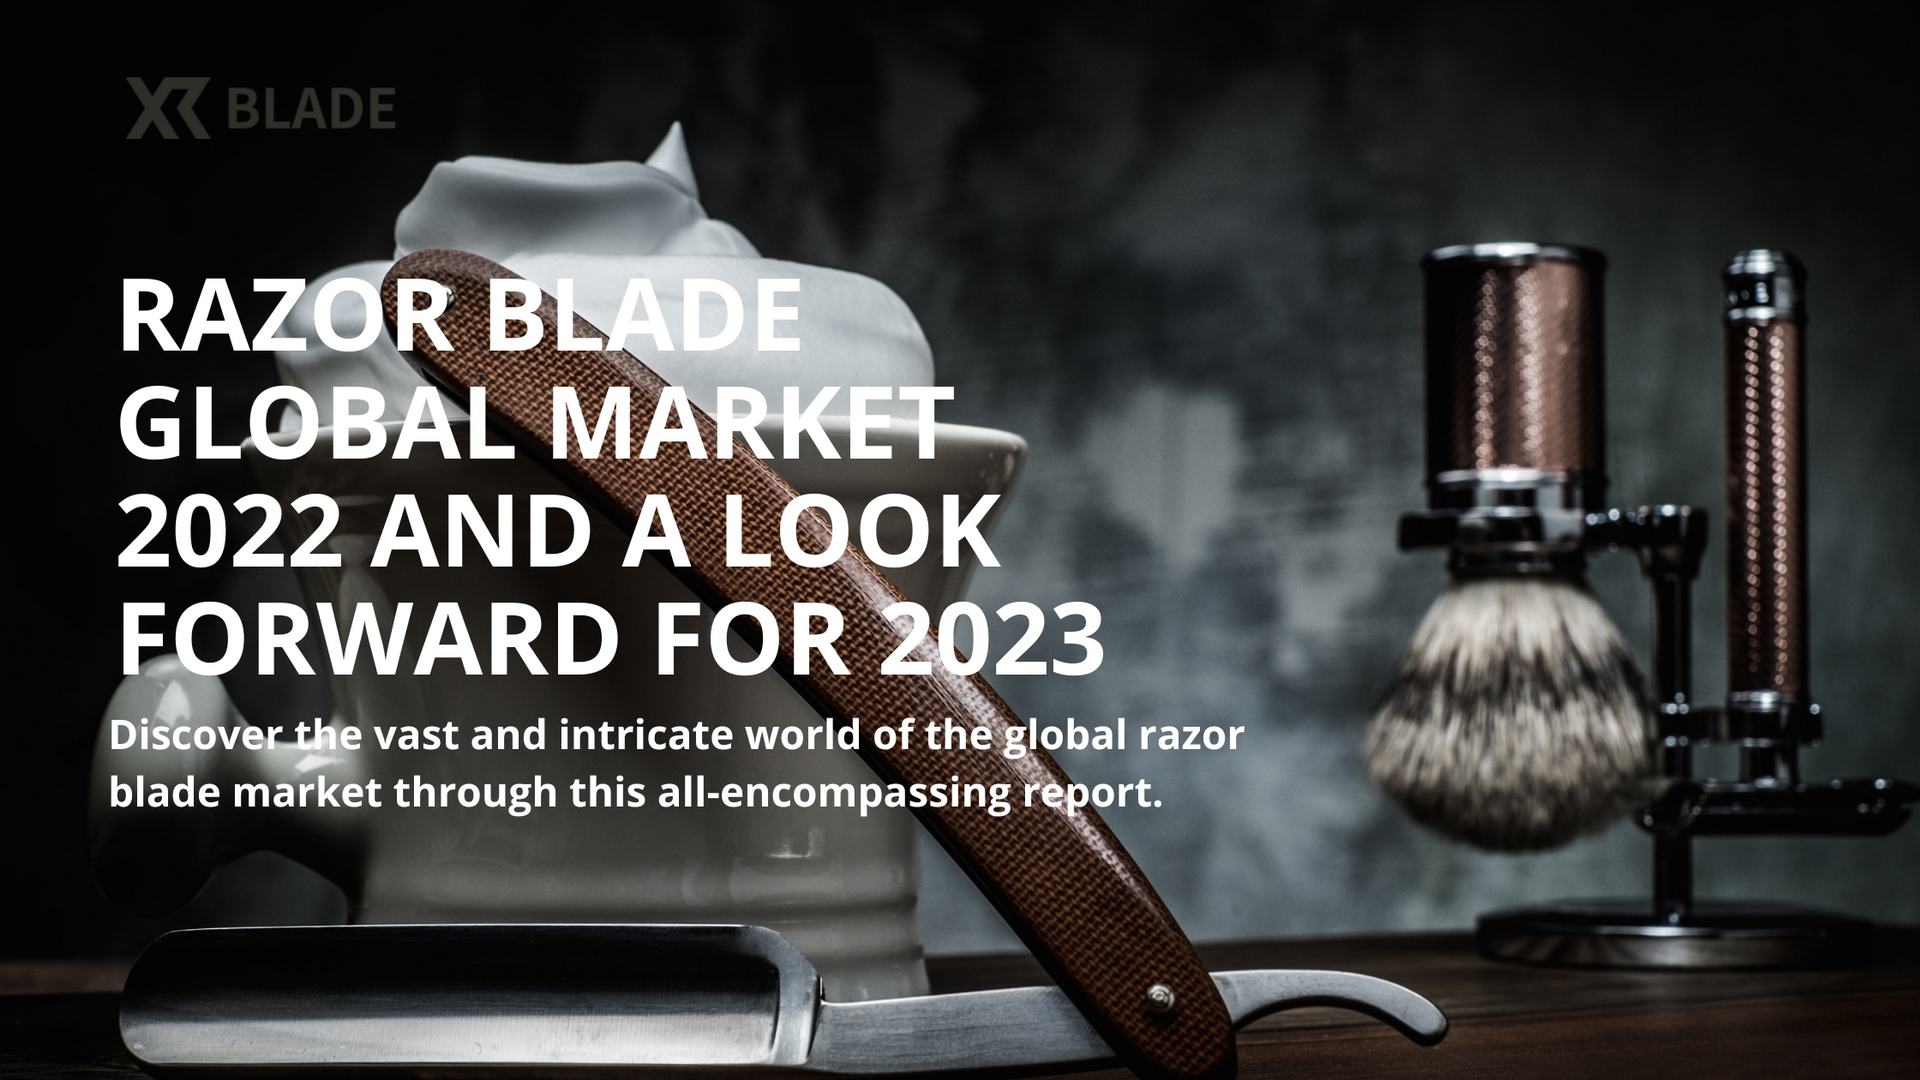 Razor Blade Global Market 2022 and a Look Forward for 2023